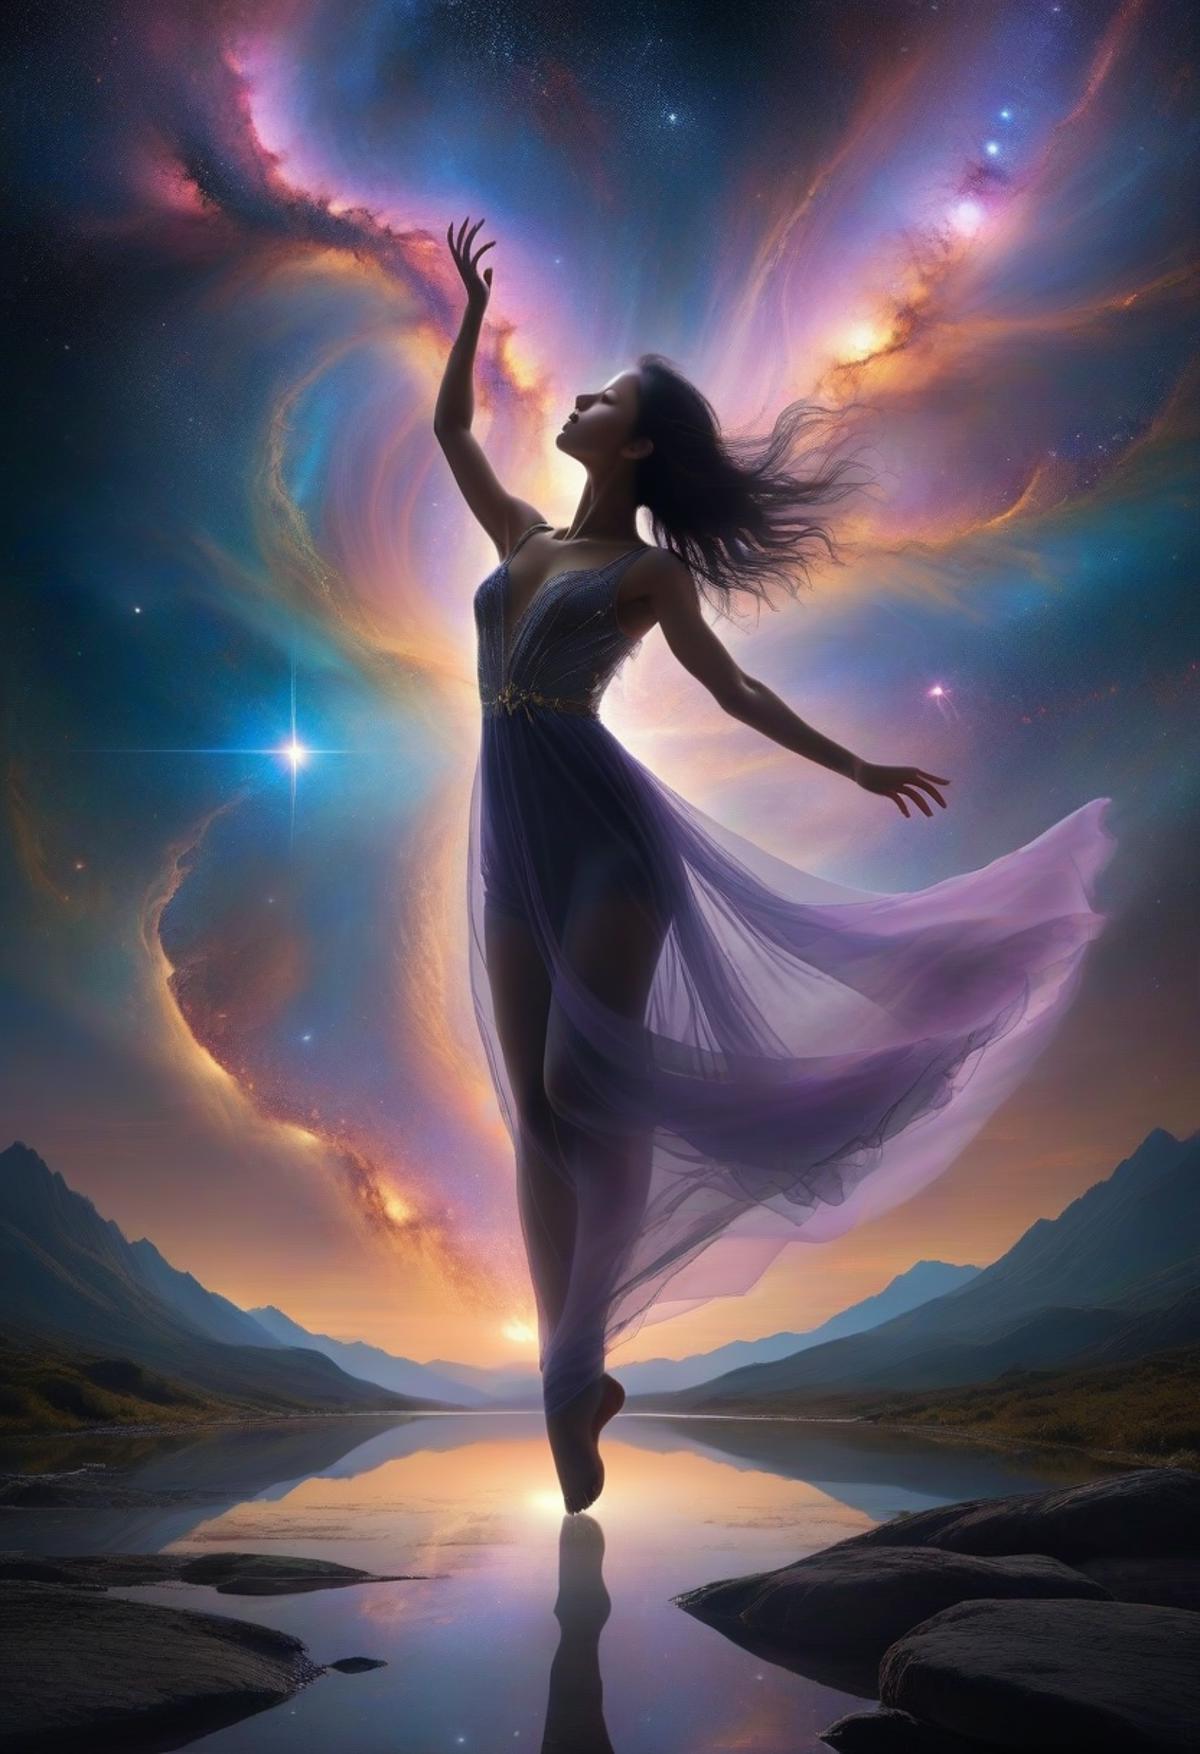 A woman dancing on the edge of a cliff with a purple dress, surrounded by a vibrant starry sky.